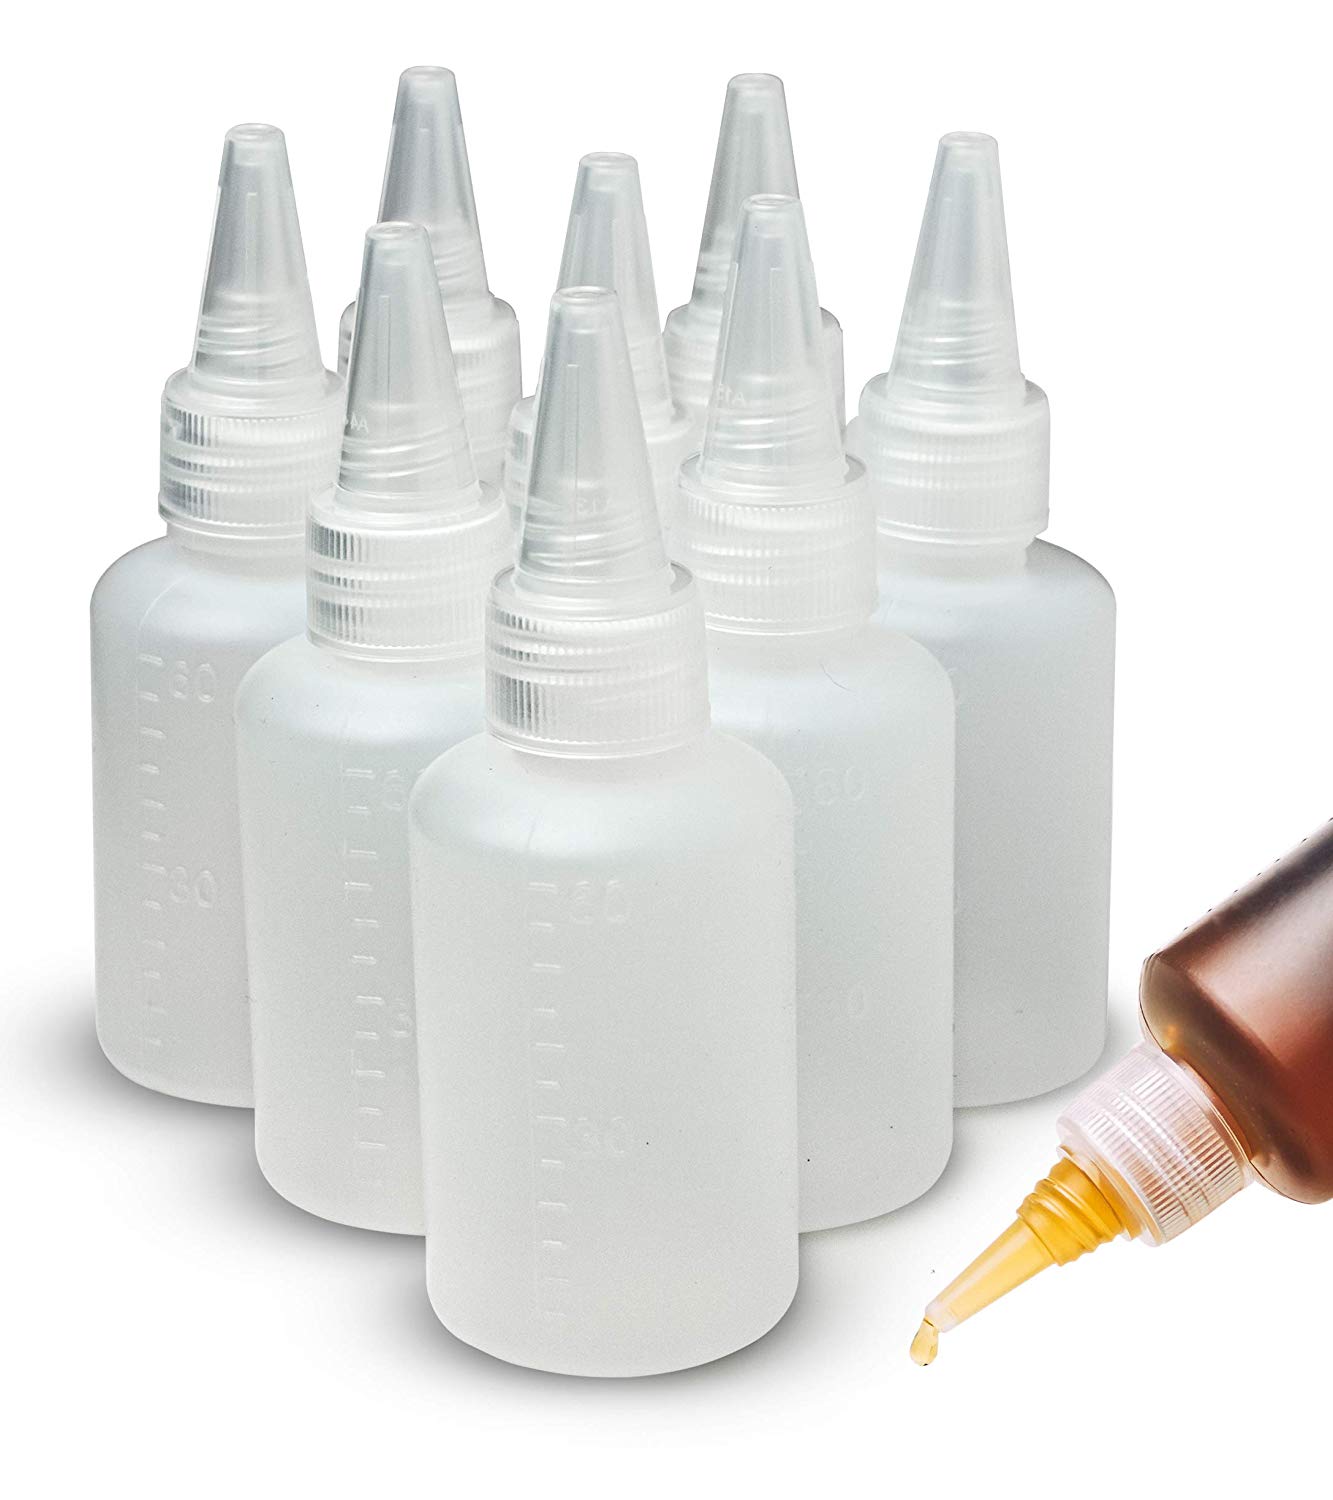 Bastex 2oz Clear Plastic Small Squeeze Bottles. Mini 2 Ounce Empty Squirt  Bottle with Twist top Caps. Great for Paint, Art, Craft, Liquids, Lotion